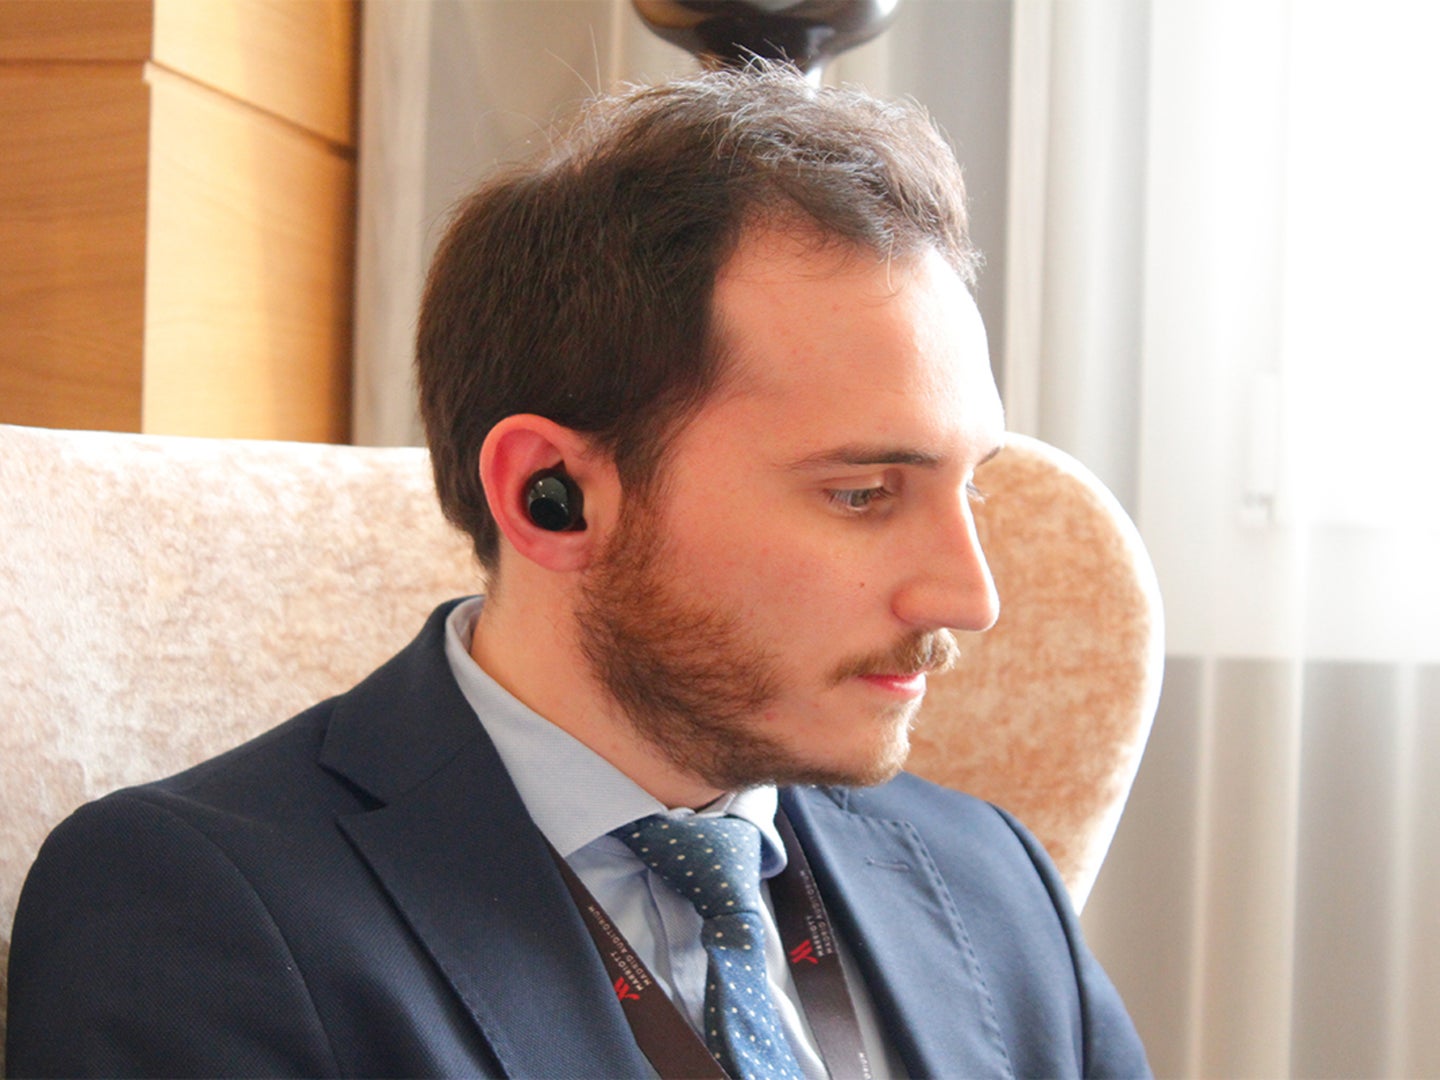 A man wearing a suit wearing wireless headphones and staring off to the side